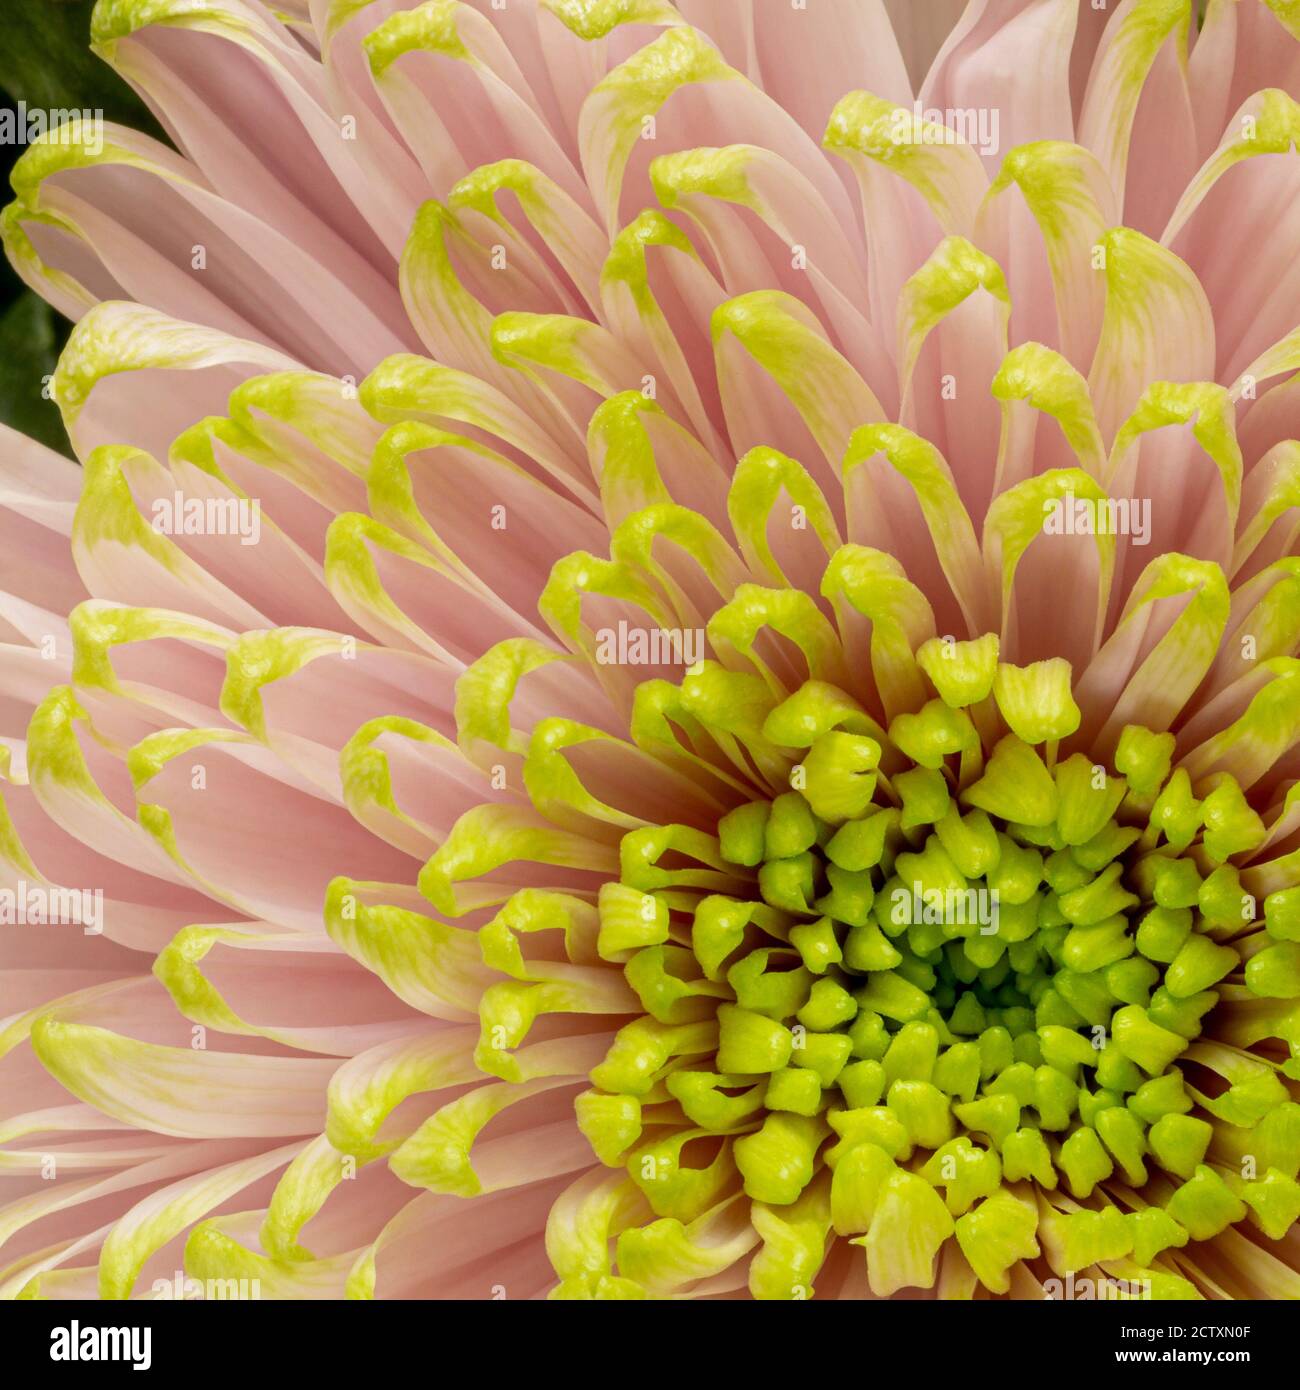 Closeup of a chrysanthemum flower with pale pink petals edged in green. Stock Photo